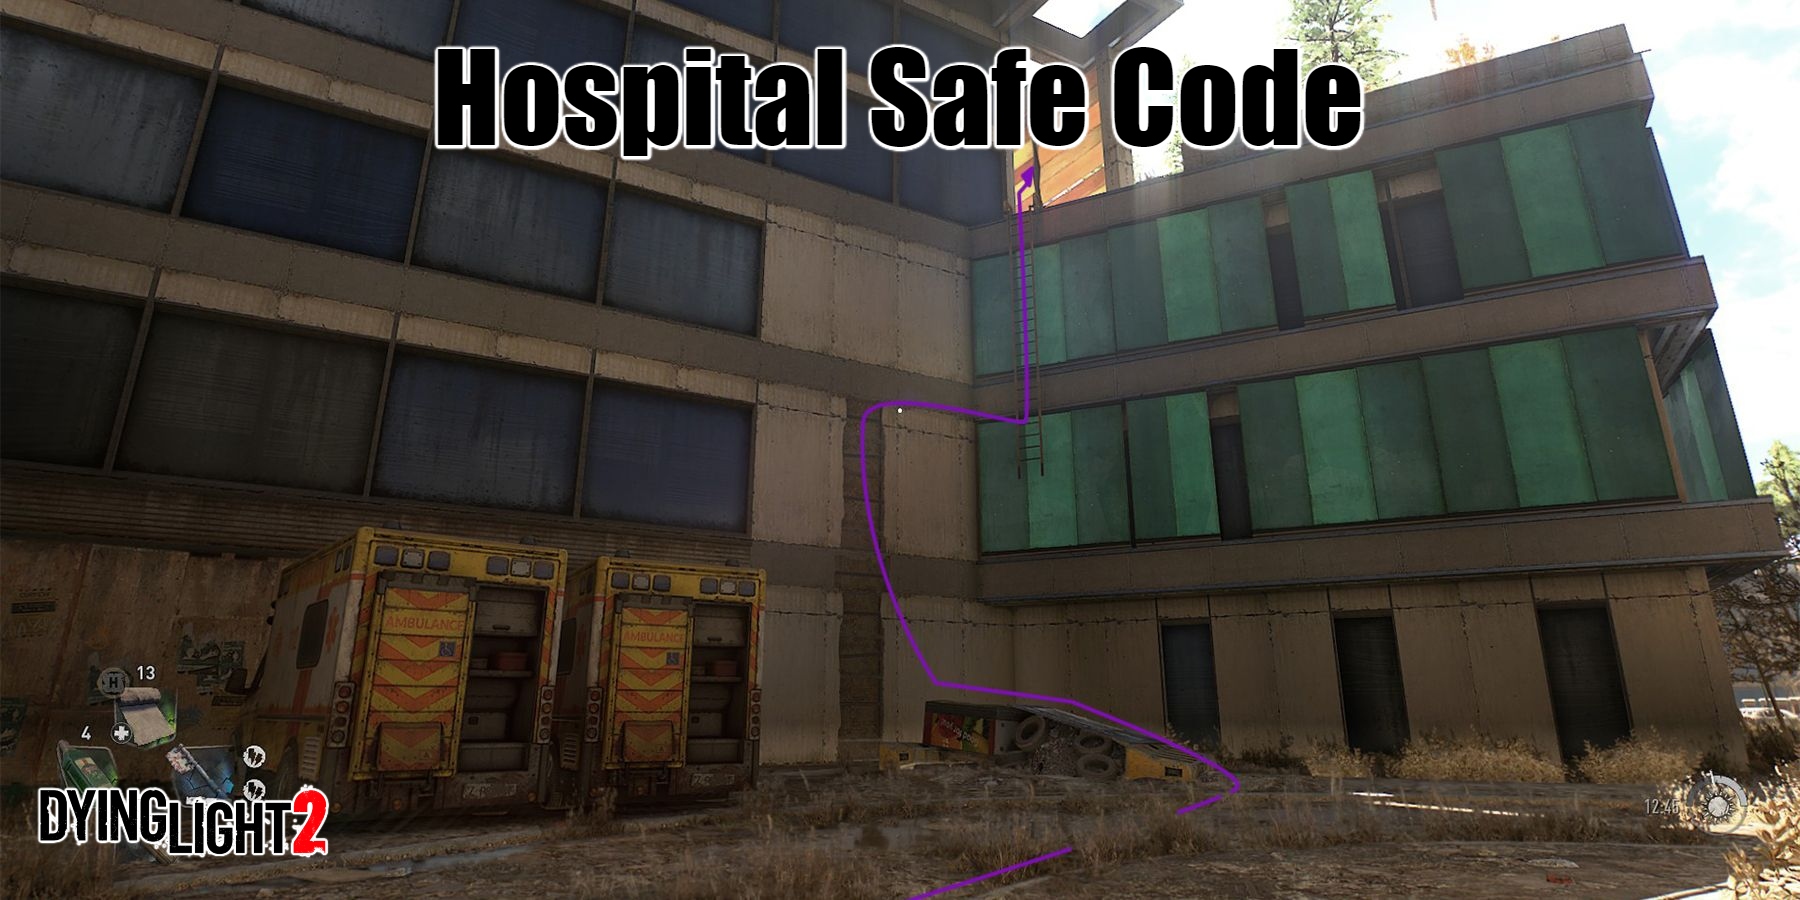 You are currently viewing Dying Light 2 Hospital Safe Code